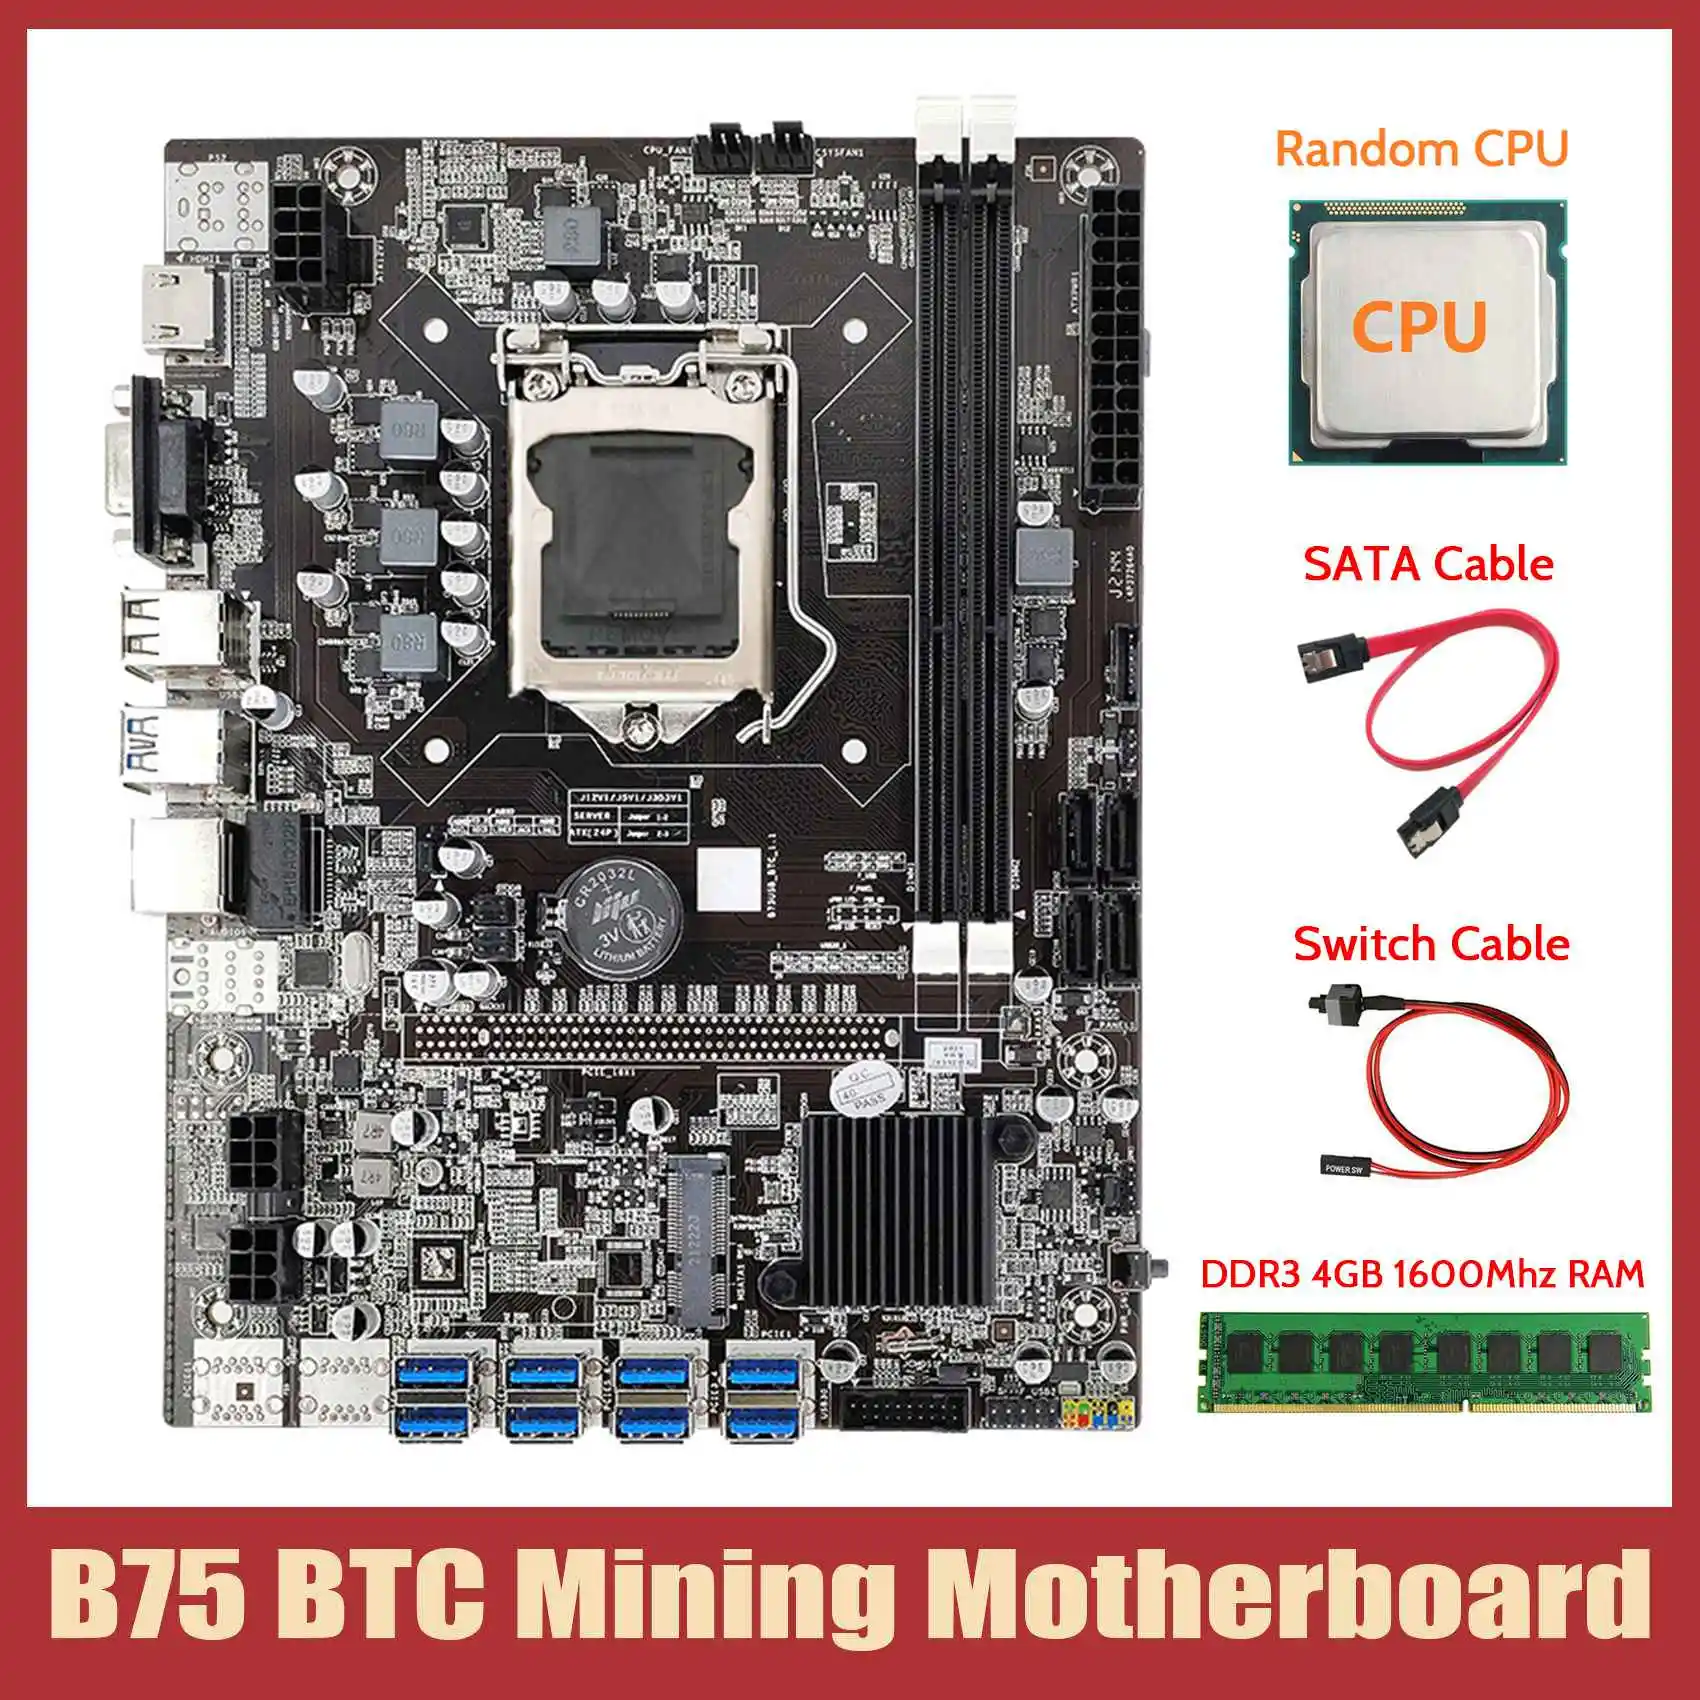 

B75 ETH Mining Motherboard+CPU+DDR3 4GB 1600Mhz RAM+Switch Cable+SATA Cable 8XPCIE to USB DDR3 B75 BTC Miner Motherboard